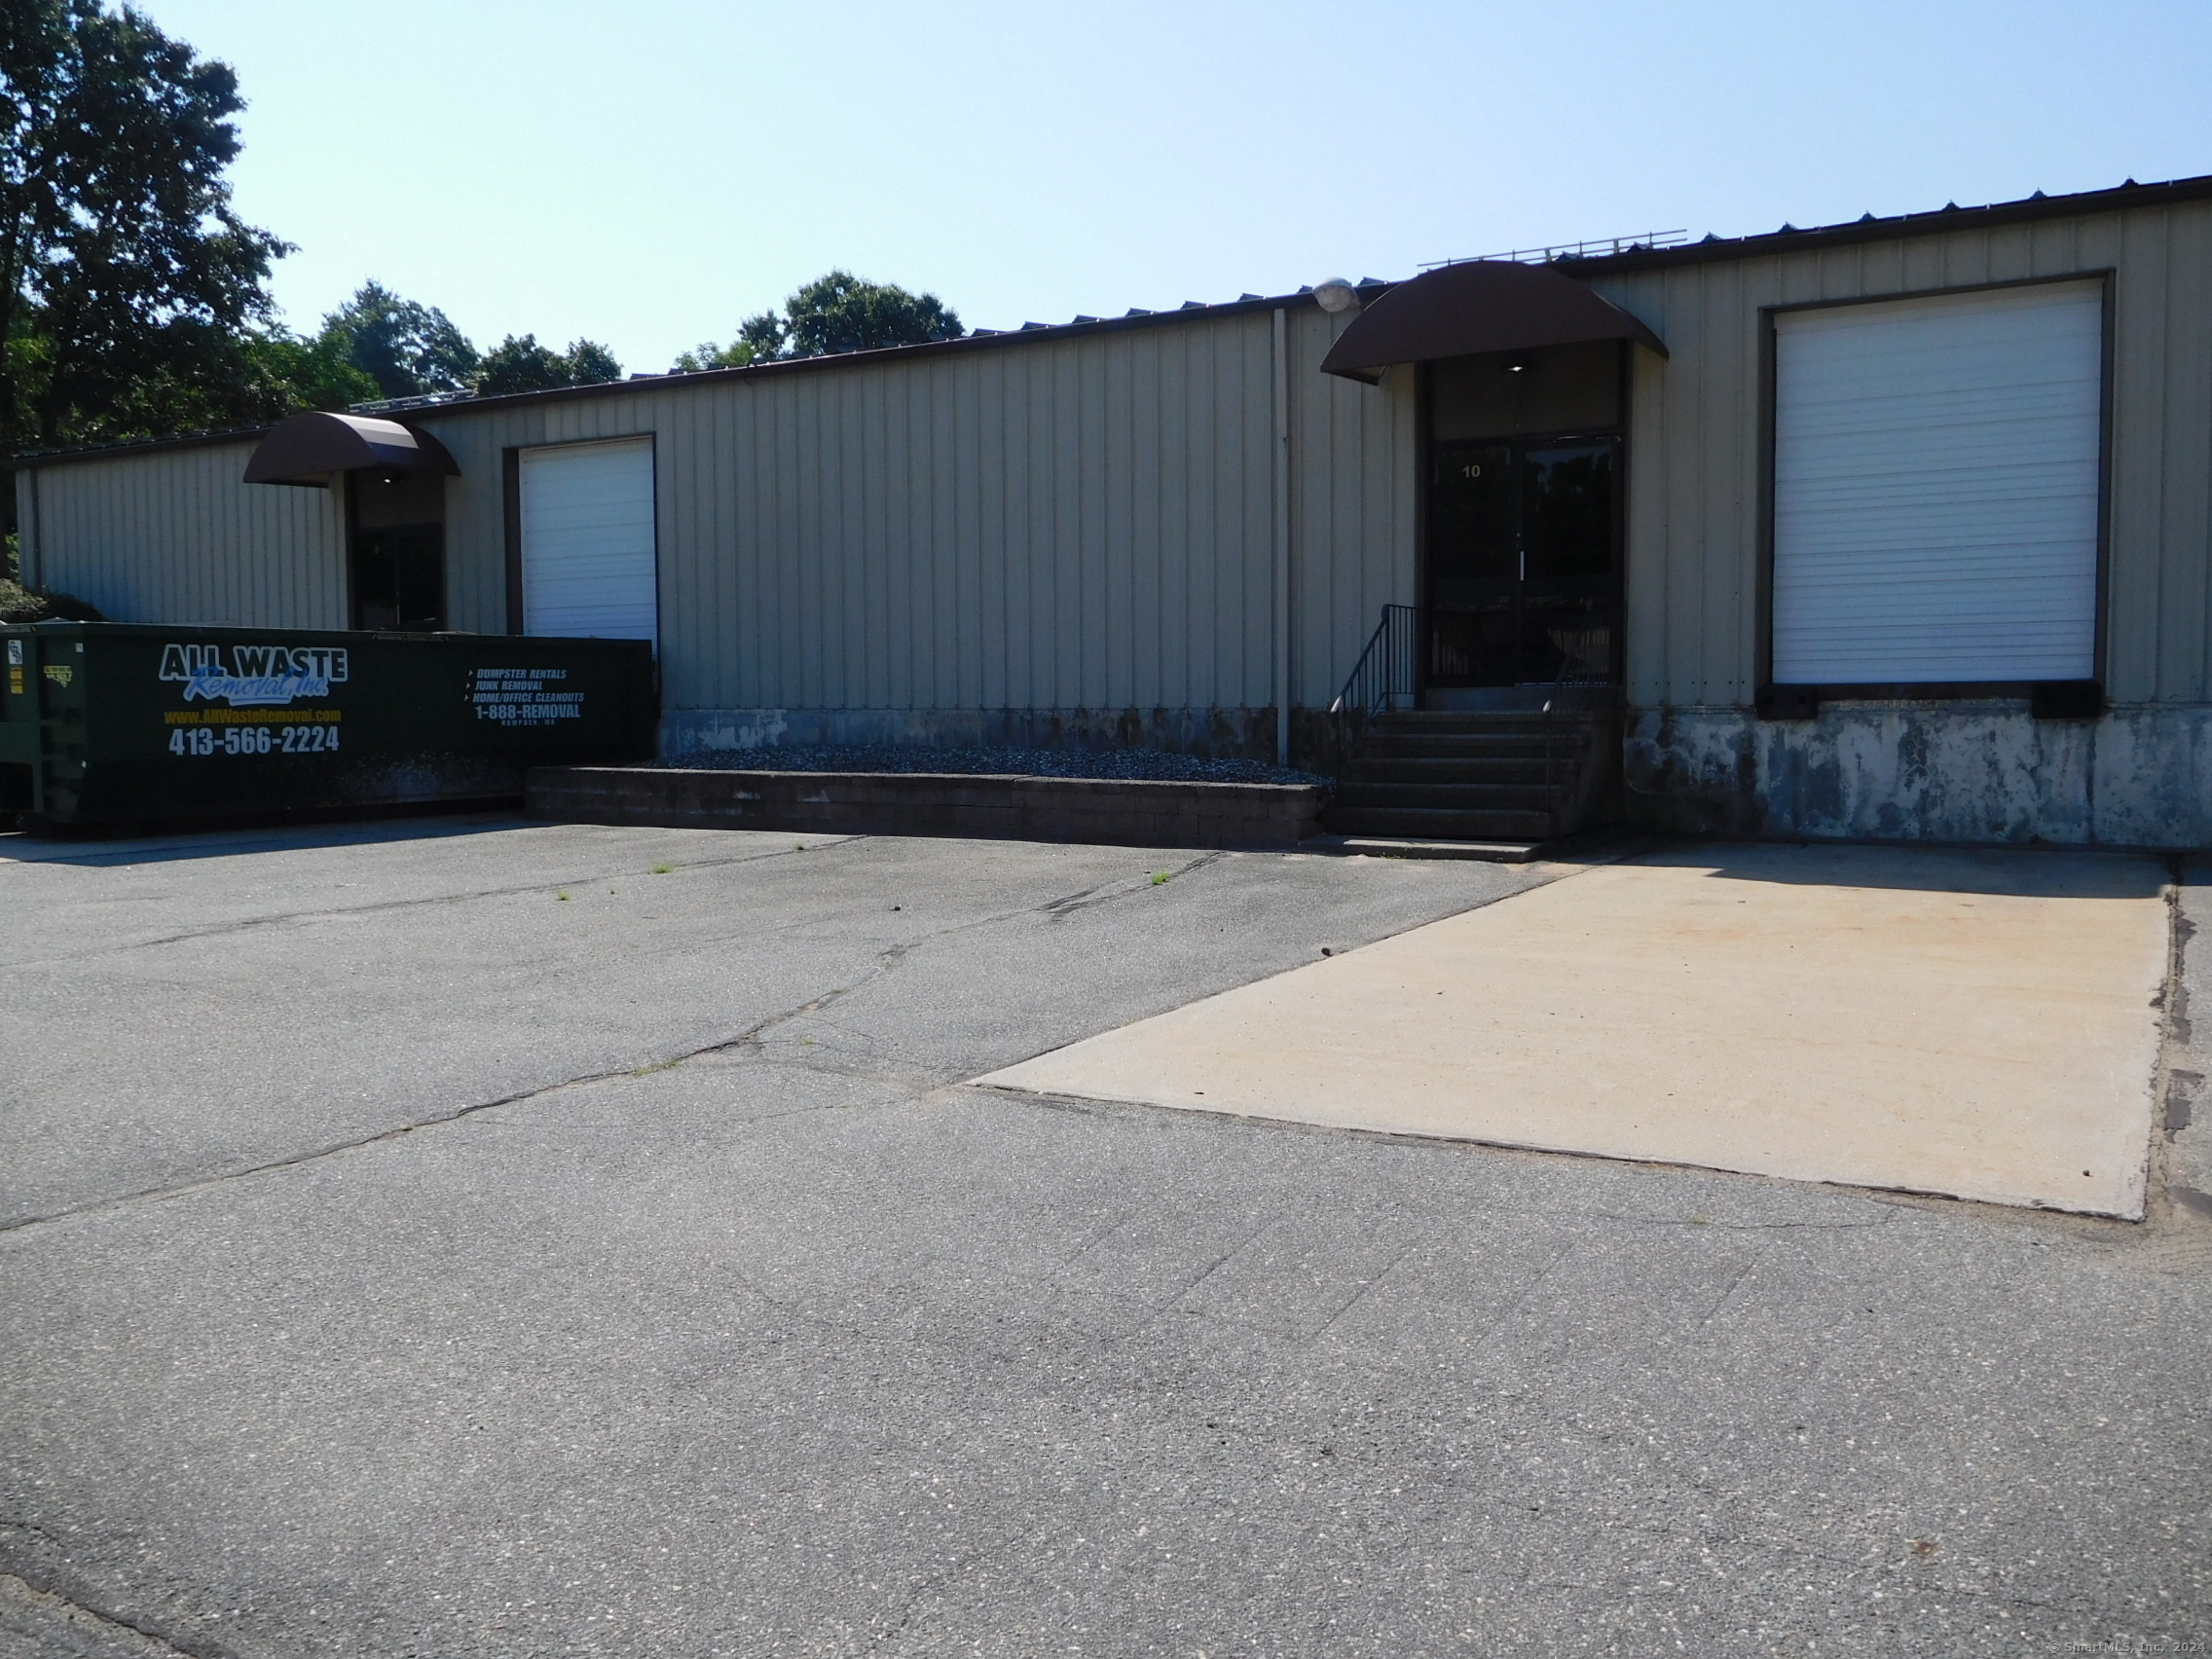 THIS PRIME INDUSTRIAL CONDO PARK UNIT IS AVAILABLE FOR LEASE. 1390 +/- SQ FT, DOCK HEIGHT OVERHEAD DOOR. OFFICE SPACE AND 1 PRIVATE RESTROOM IN UNIT. HIGH TRAFFIC AREA WITH EASY ACCESSS TO INTERSTATE 91 NORTH AND SOUTH ALONG WITH ACCESS TO RTE 5. TENANT IS RESPONSIBLE FOR RENT, ELECTRIC, HEAT(PROPANE), HOT WATER, TRASH, INSURANCE, CREDIT CHECK. THIS IS A GREAT SPACE FOR ALL TYPES OF CONTRACTORS, ADDITIONAL STORAGE TO CLEAN OUT YOUR HOME OR THE PERSON WHO HAS A HOBBY AND NEEDS A PLACE TO CALL THEIR OWN!!!